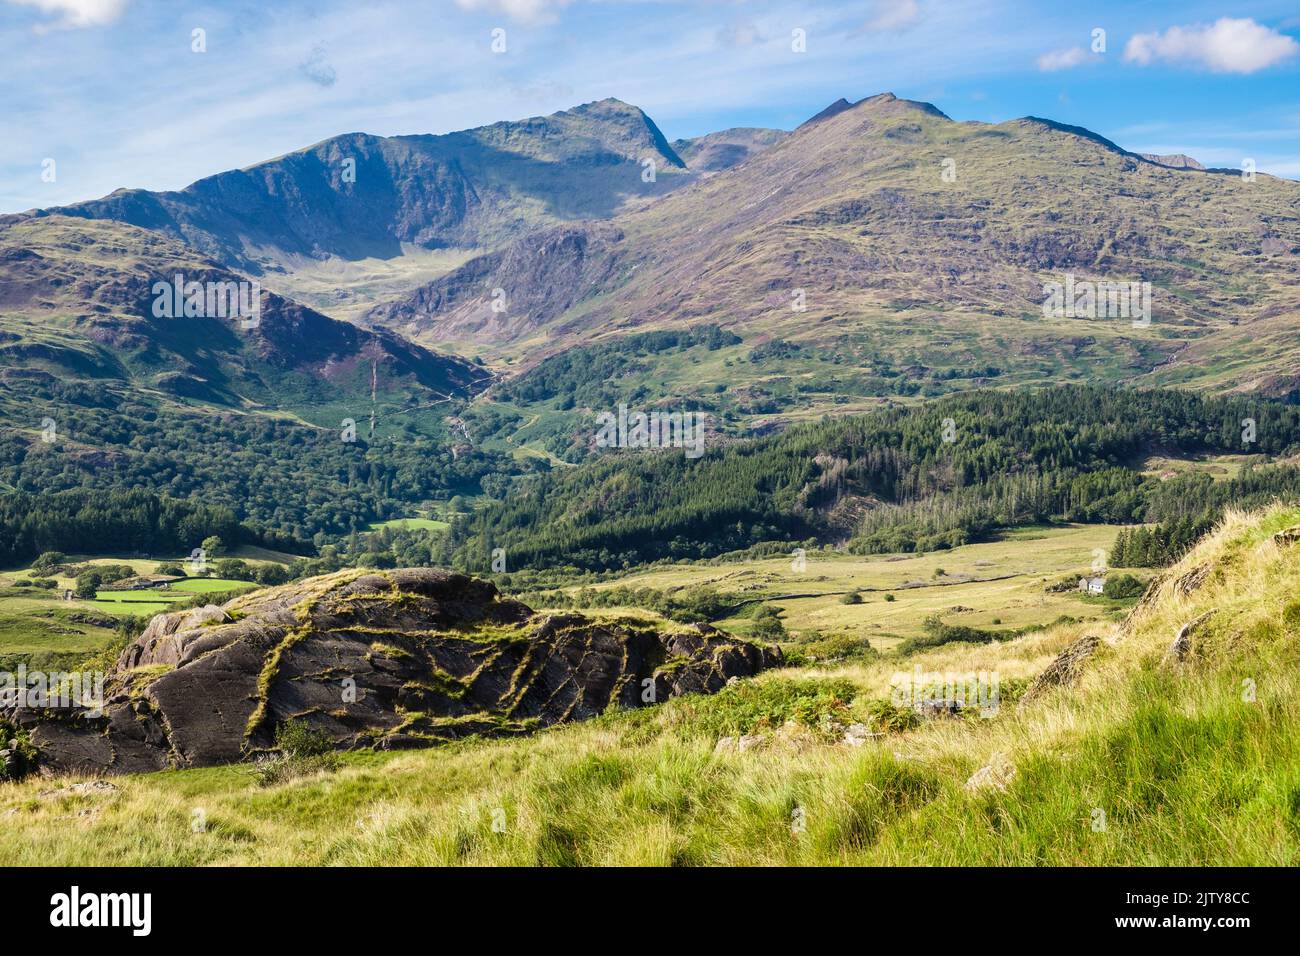 Mount Snowdon summit peak across Nant Gwynant valley from lower slopes of Cnicht in mountains of Snowdonia National Park. Beddgelert Gwynedd Wales UK Stock Photo